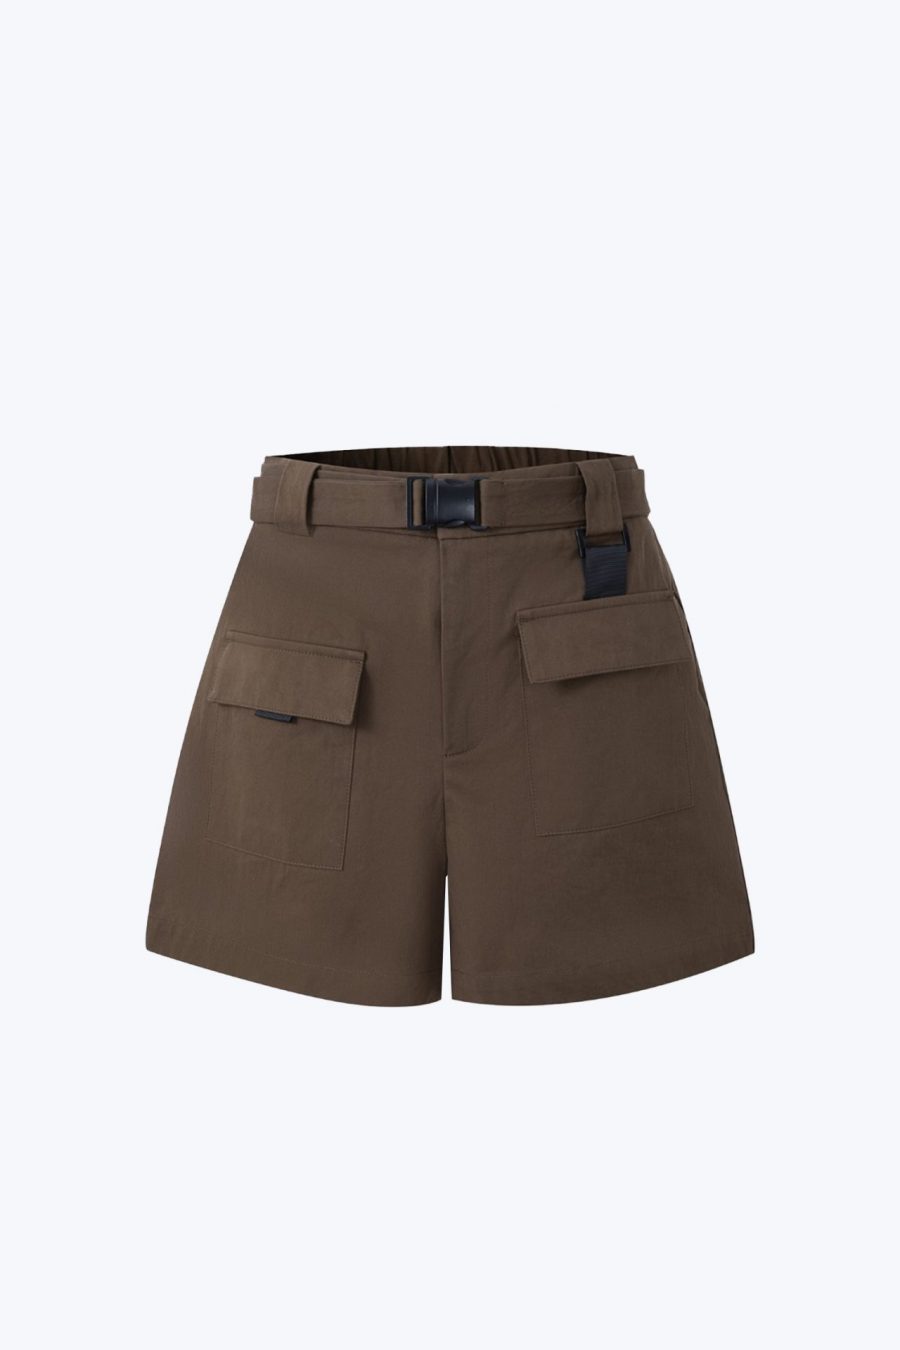 CPS001056A Buckled Shorts army green